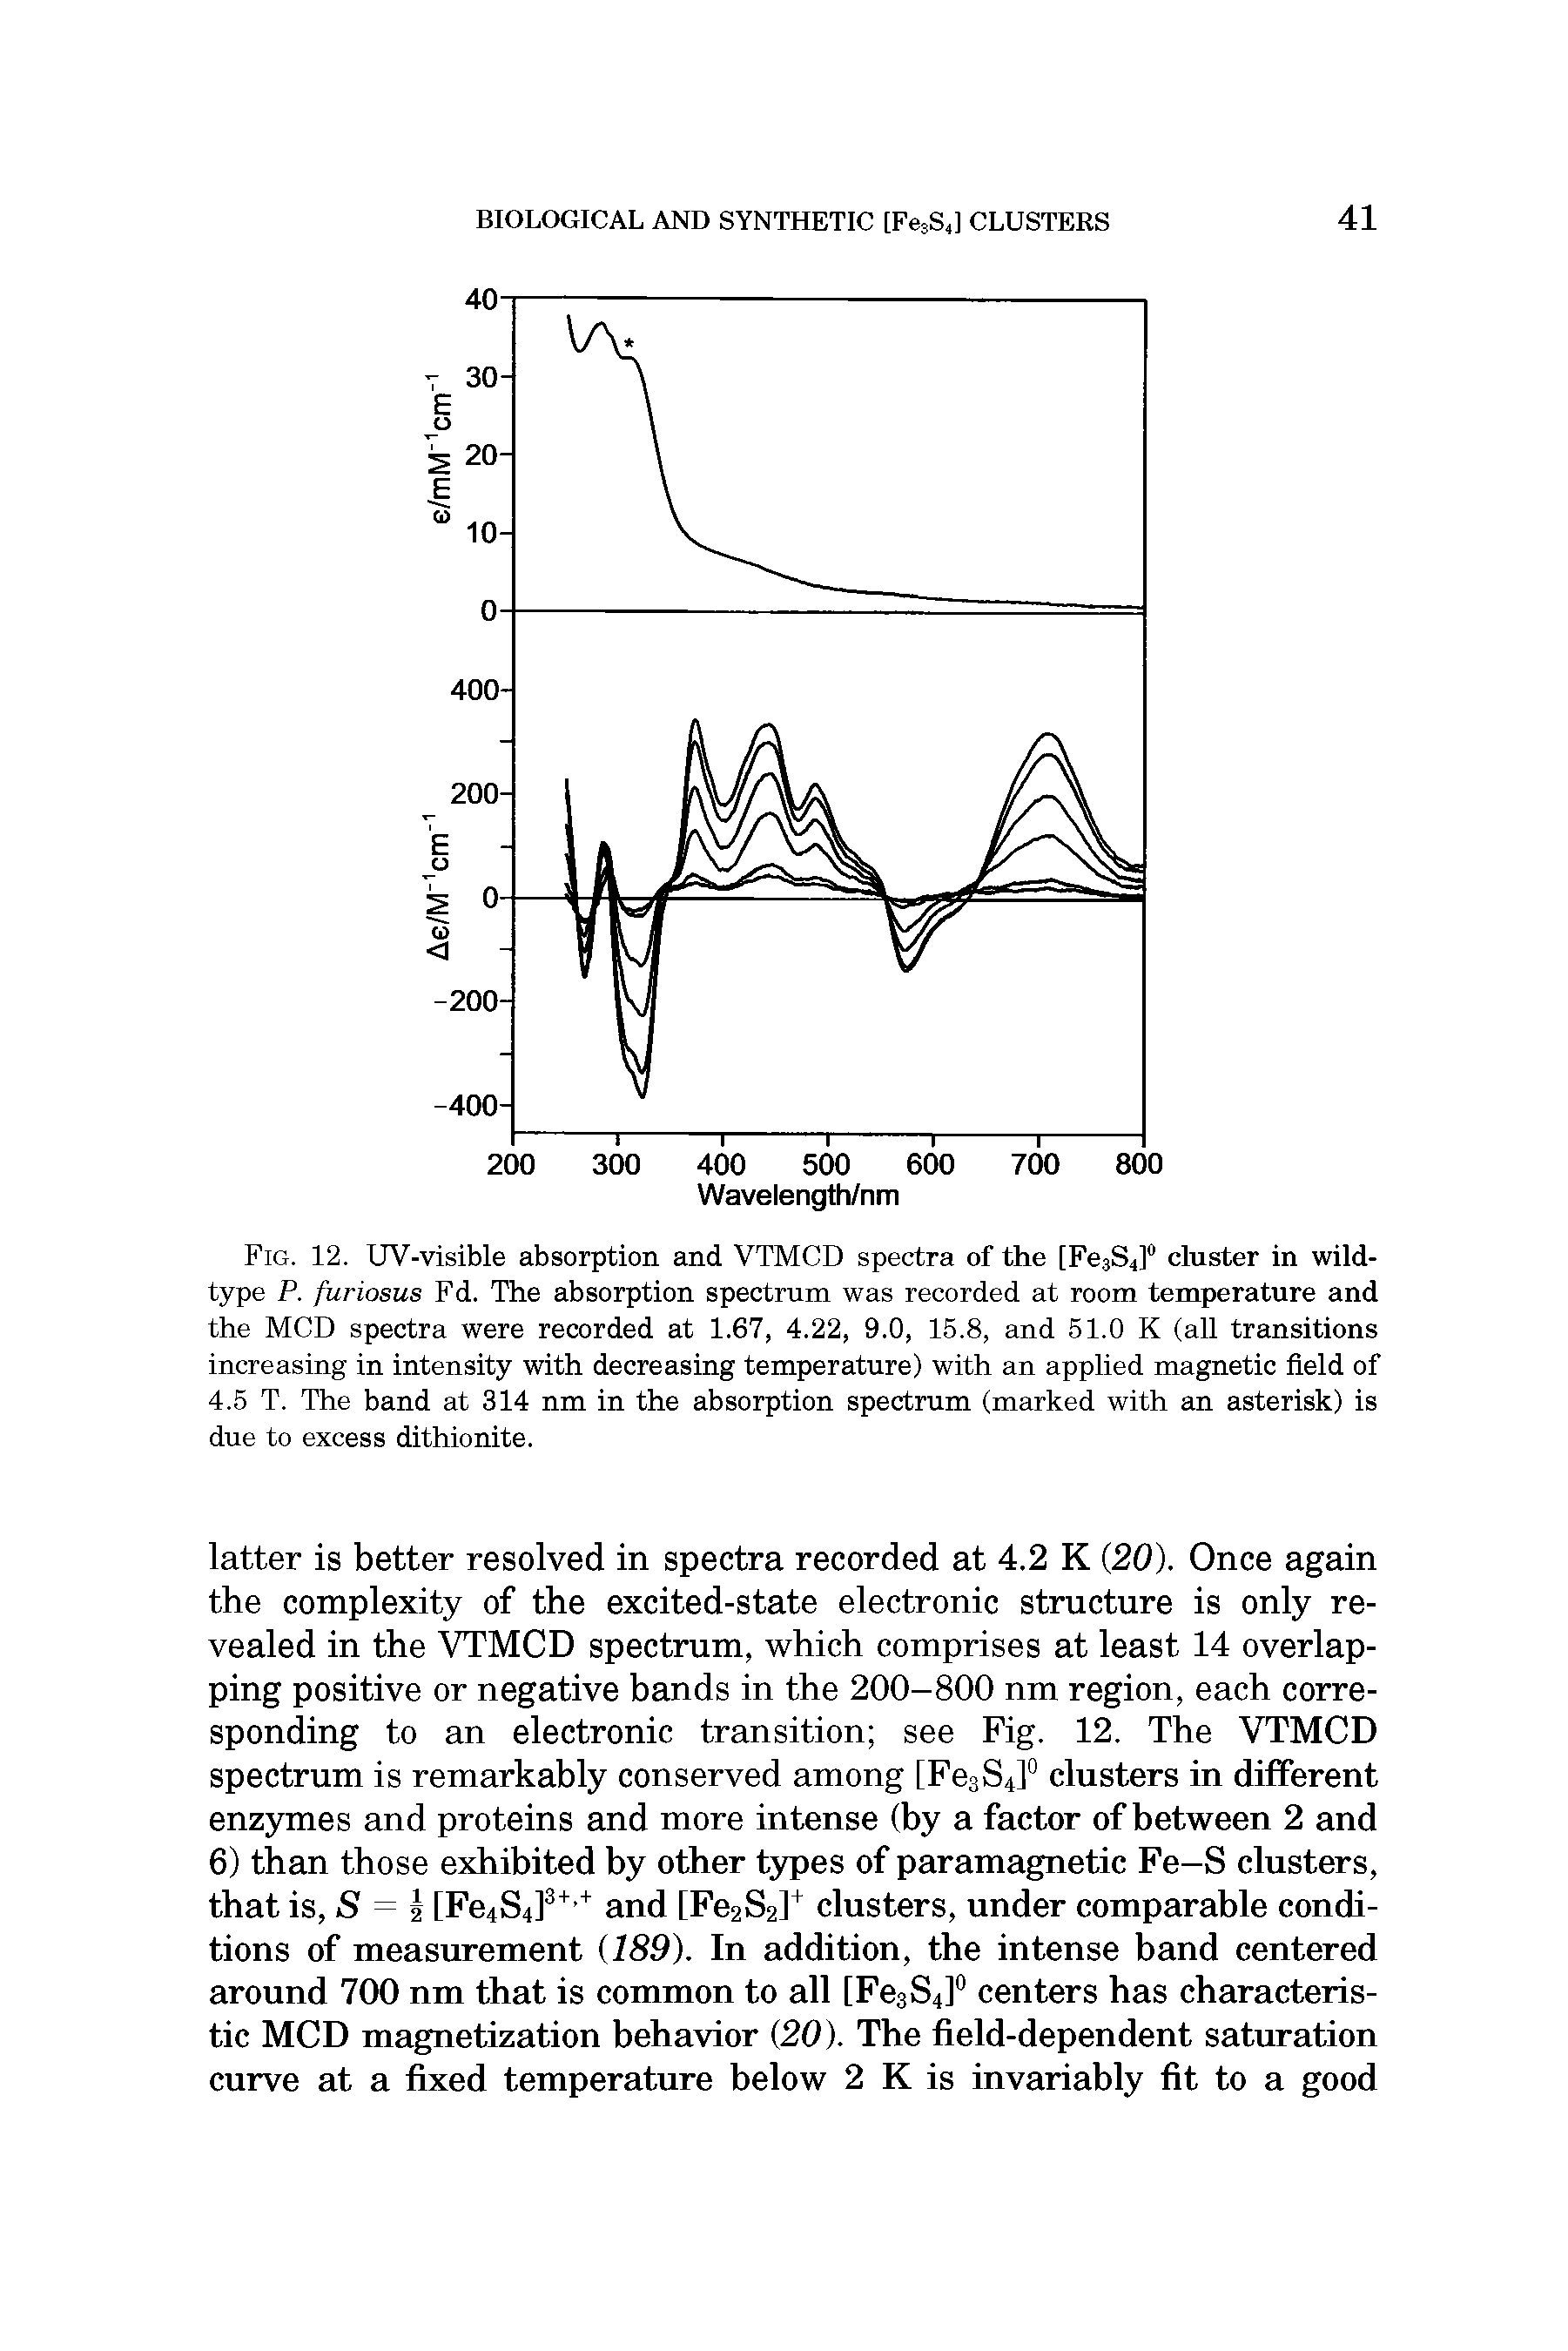 Fig. 12. UV-visible absorption and VTMCD spectra of the [Fe3S4] cluster in wild-type P. furiosus Fd. The absorption spectrum was recorded at room temperature and the MOD spectra were recorded at 1.67, 4.22, 9.0, 15.8, and 51.0 K (all transitions increasing in intensity with decreasing temperature) with an applied magnetic field of 4.5 T. The band at 314 nm in the absorption spectrum (marked with an asterisk) is due to excess dithionite.